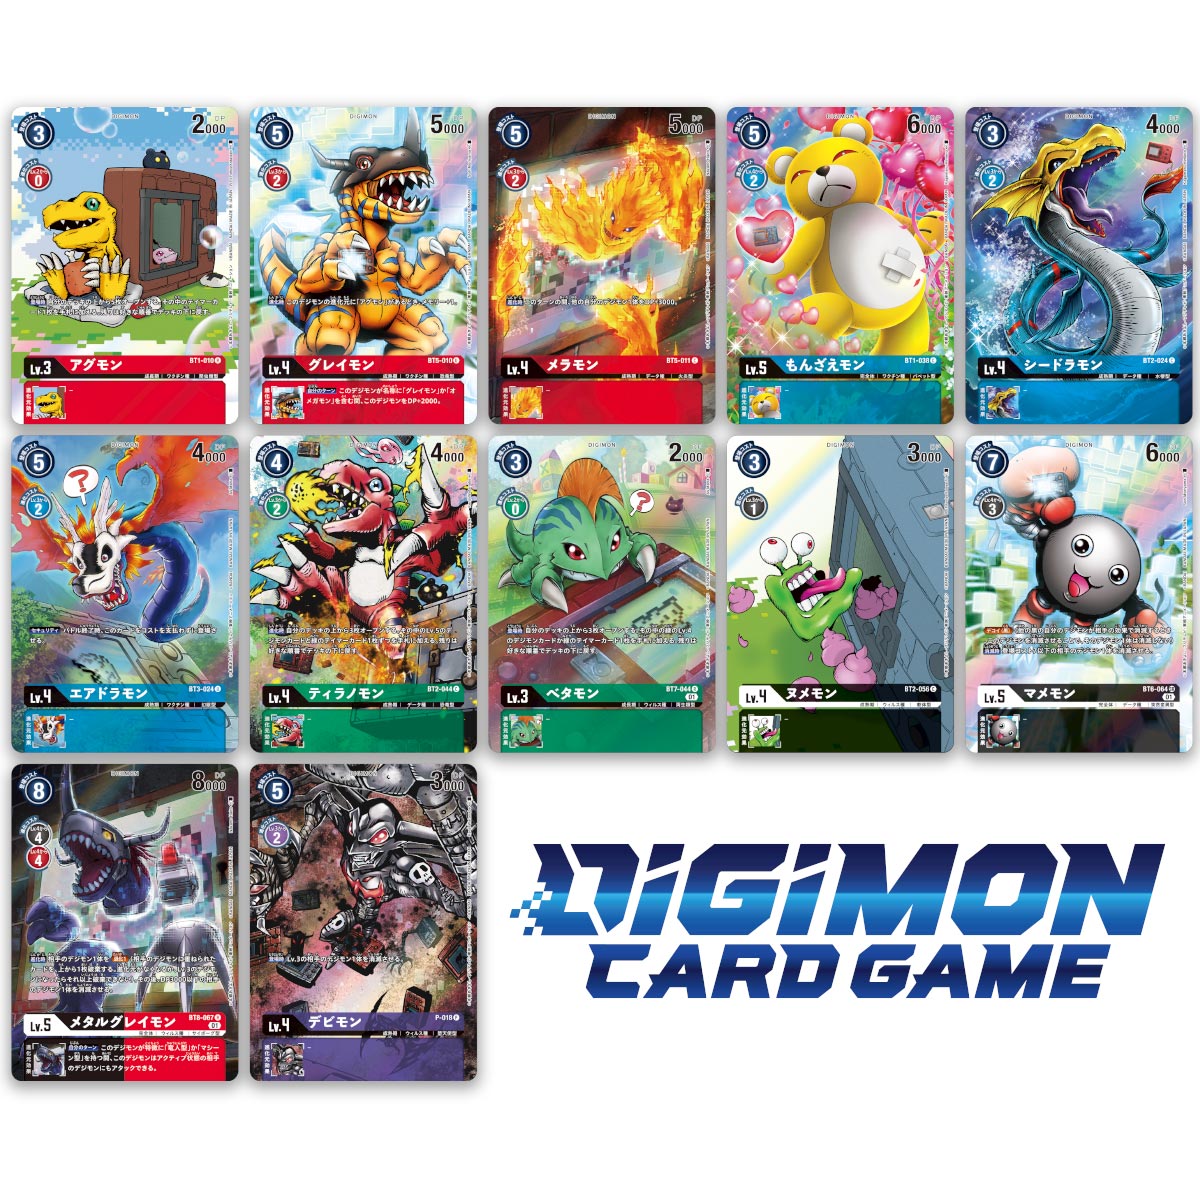 [Binder] Digimon Card Game Memorial Collection 25TH ANNIVERSARY (周邊套裝)